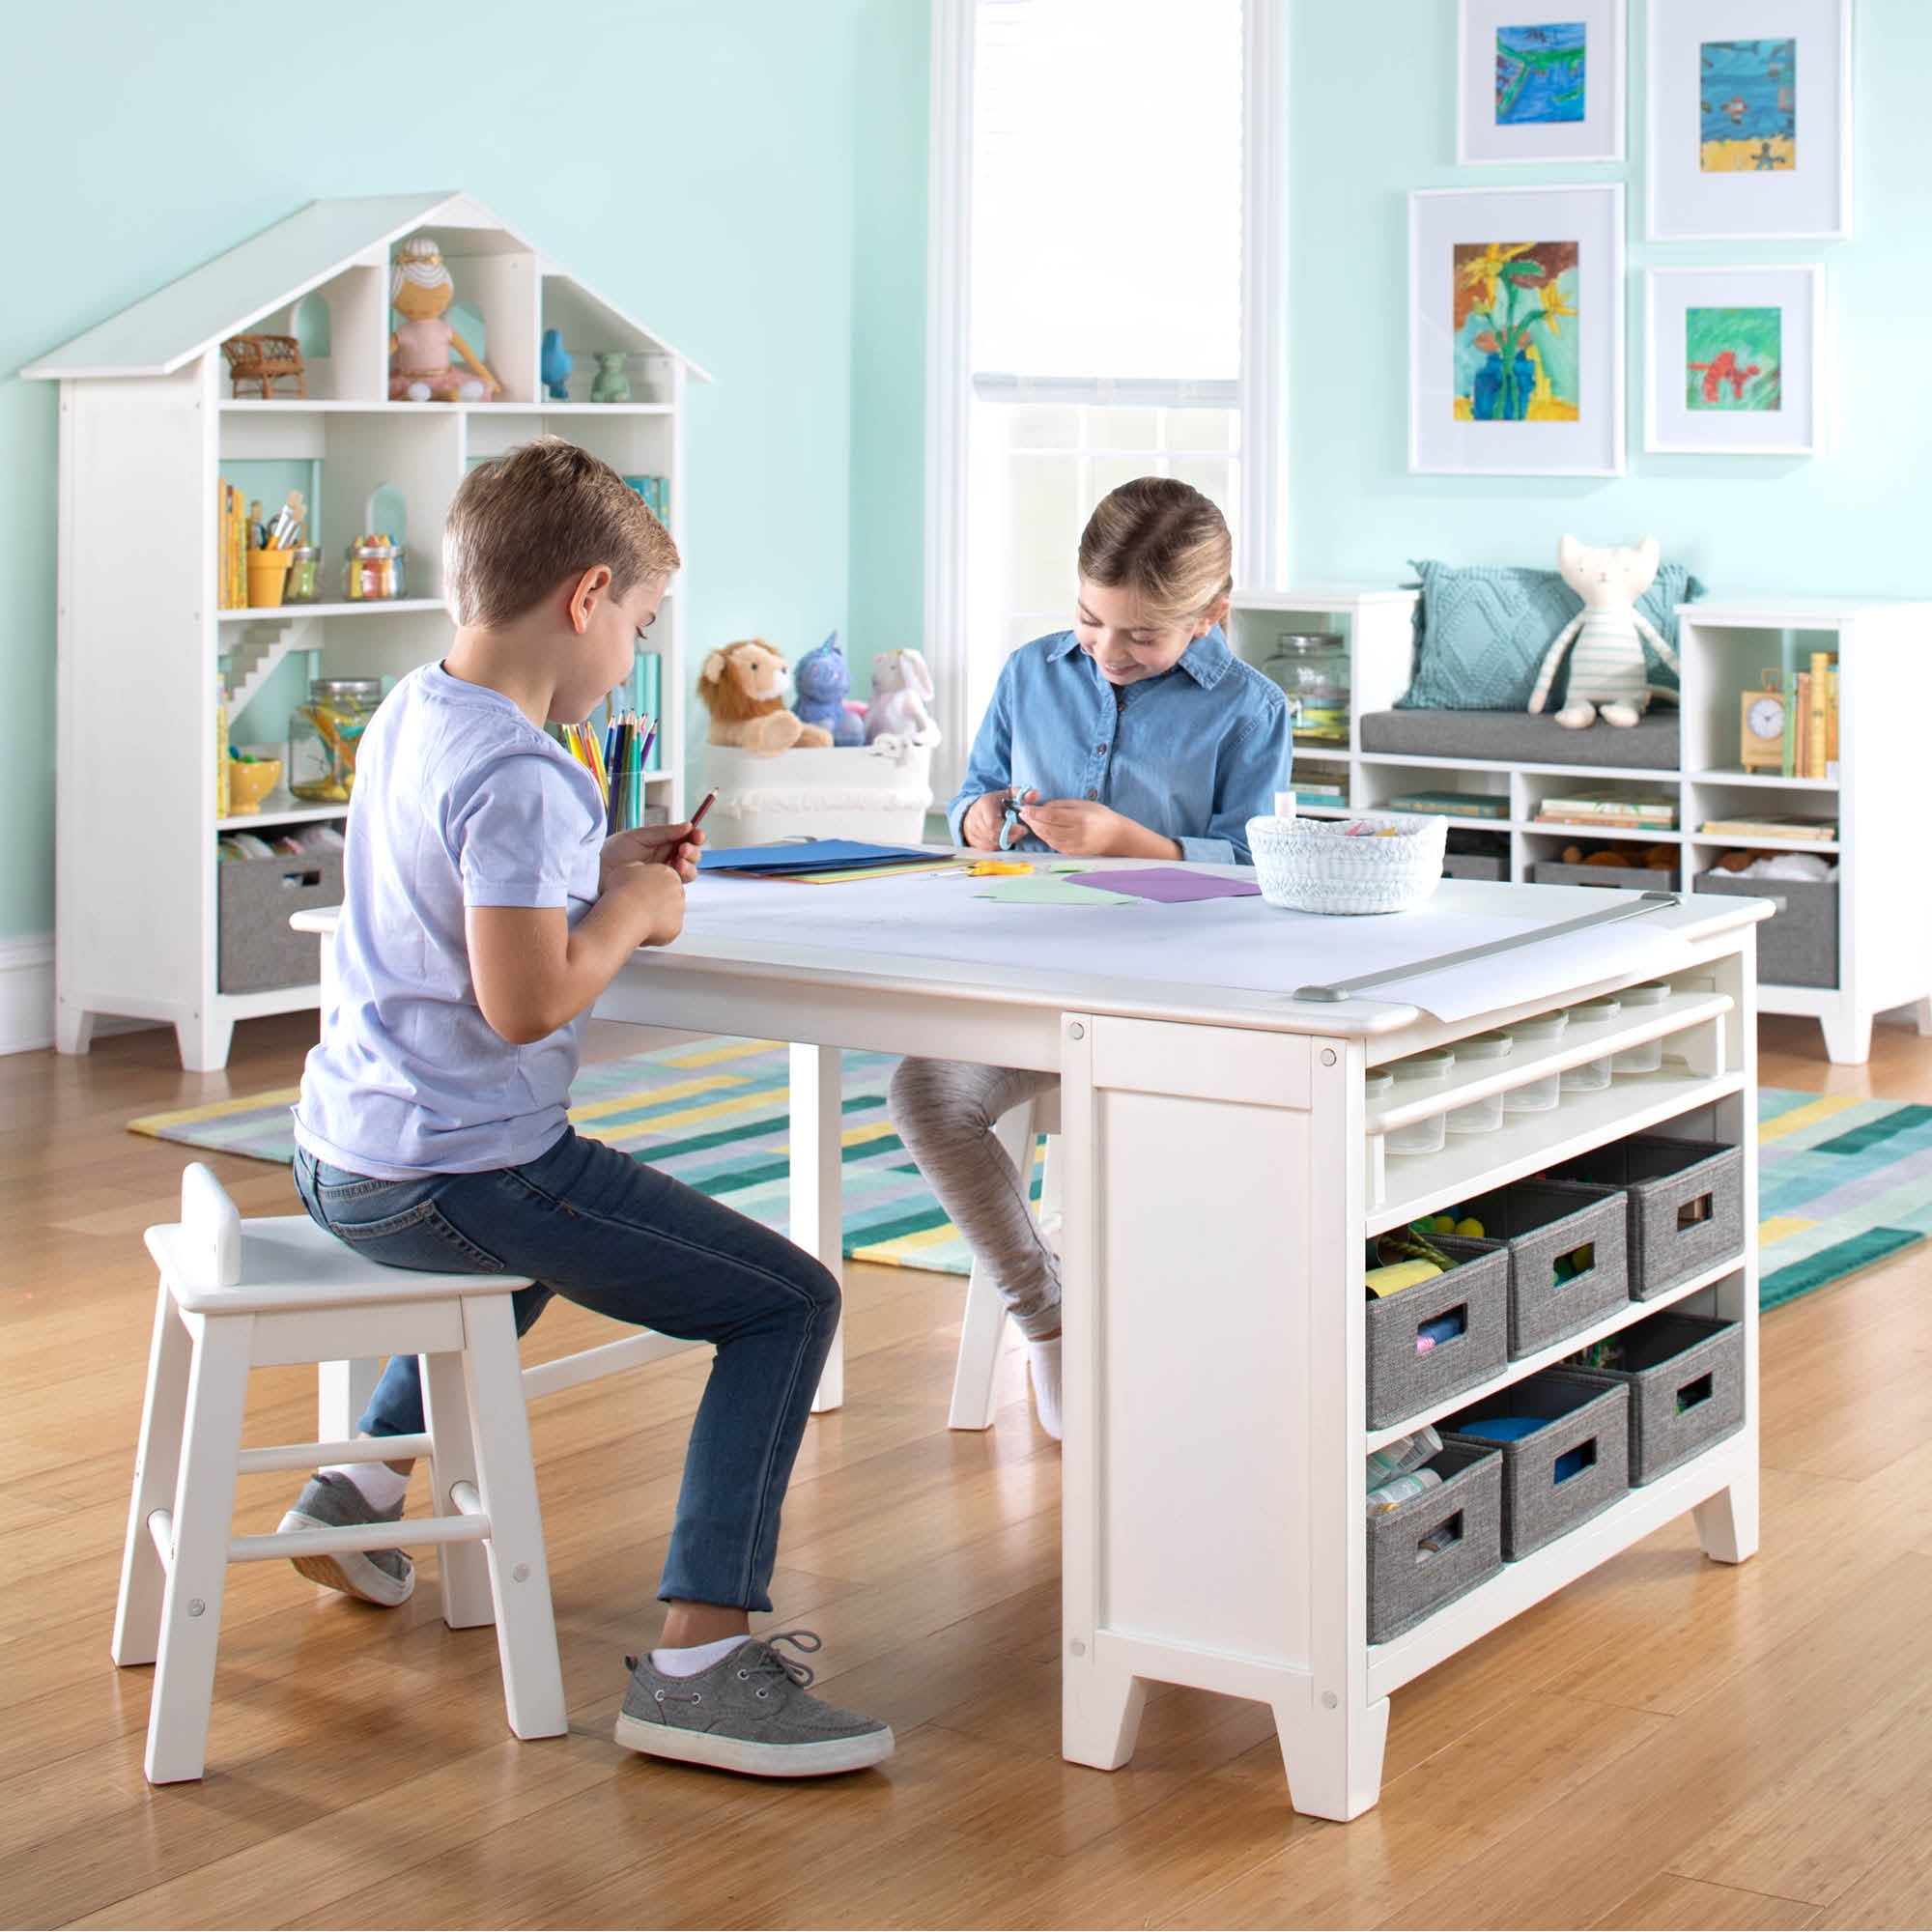 Martha Stewart Living and Learning Kids' Art Table and Stool Set (White) -  Wooden Drawing and Painting Desk with Paper Roller, Paint Cups and  Removable Craft Supplies Storage Bins 